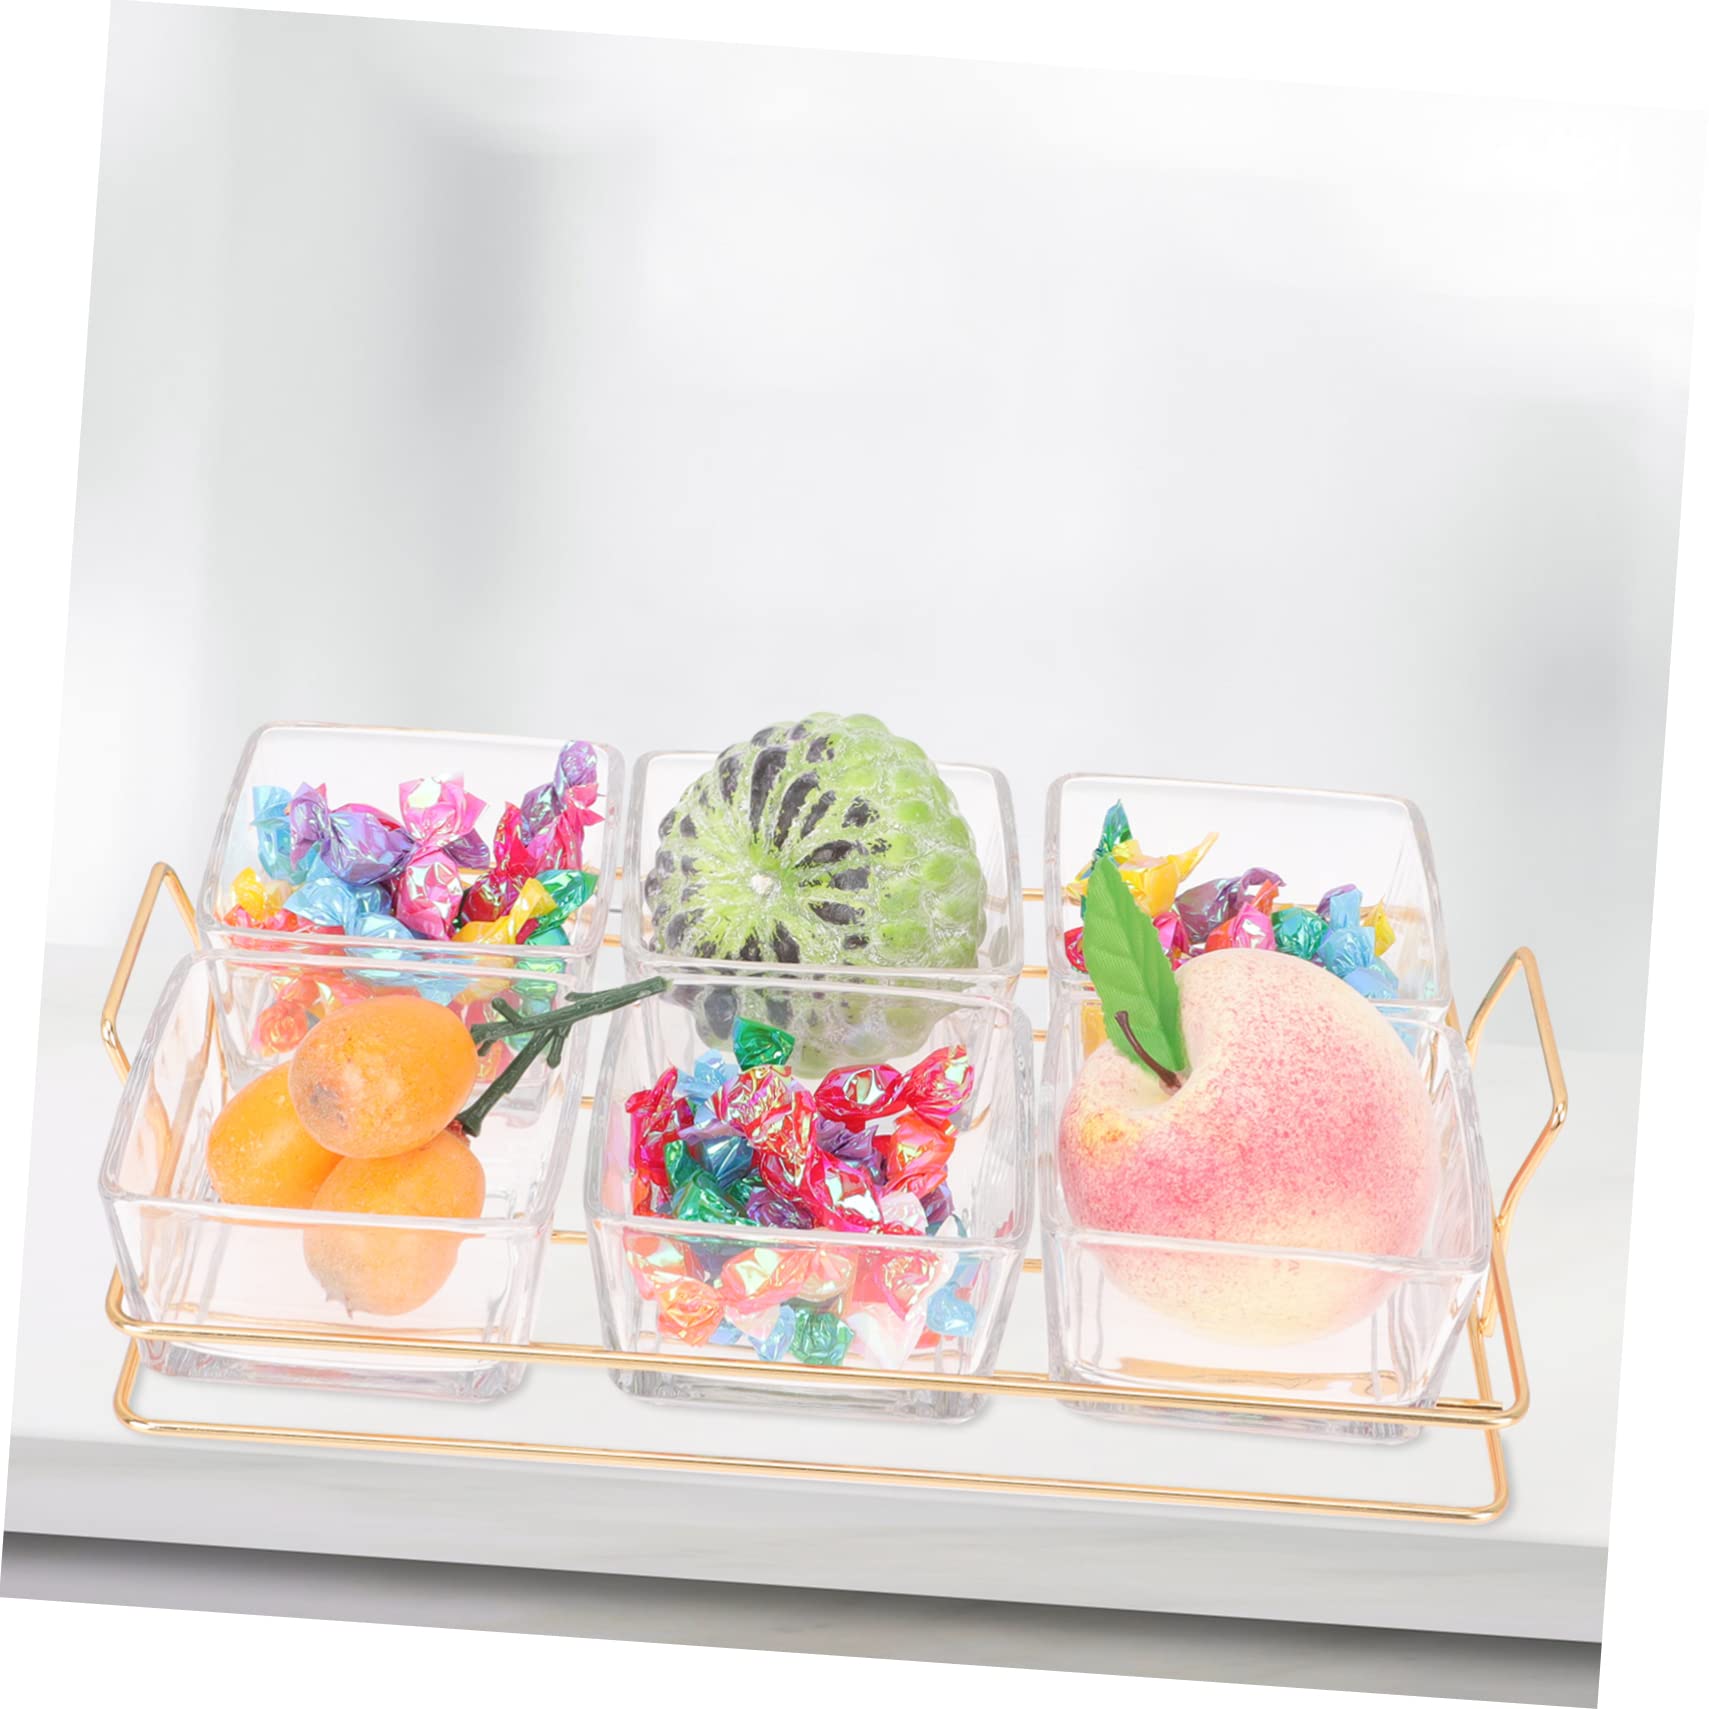 VILLFUL 1 Set Divided Fruit Plate Fruit Tray Candy Tray Appetizer Tray Container with Lid Hot Cocoa Bar Seasoning Jars Serving Dishes Fruit Serving Tray Grid Fruit Dish Dried Fruit Plate